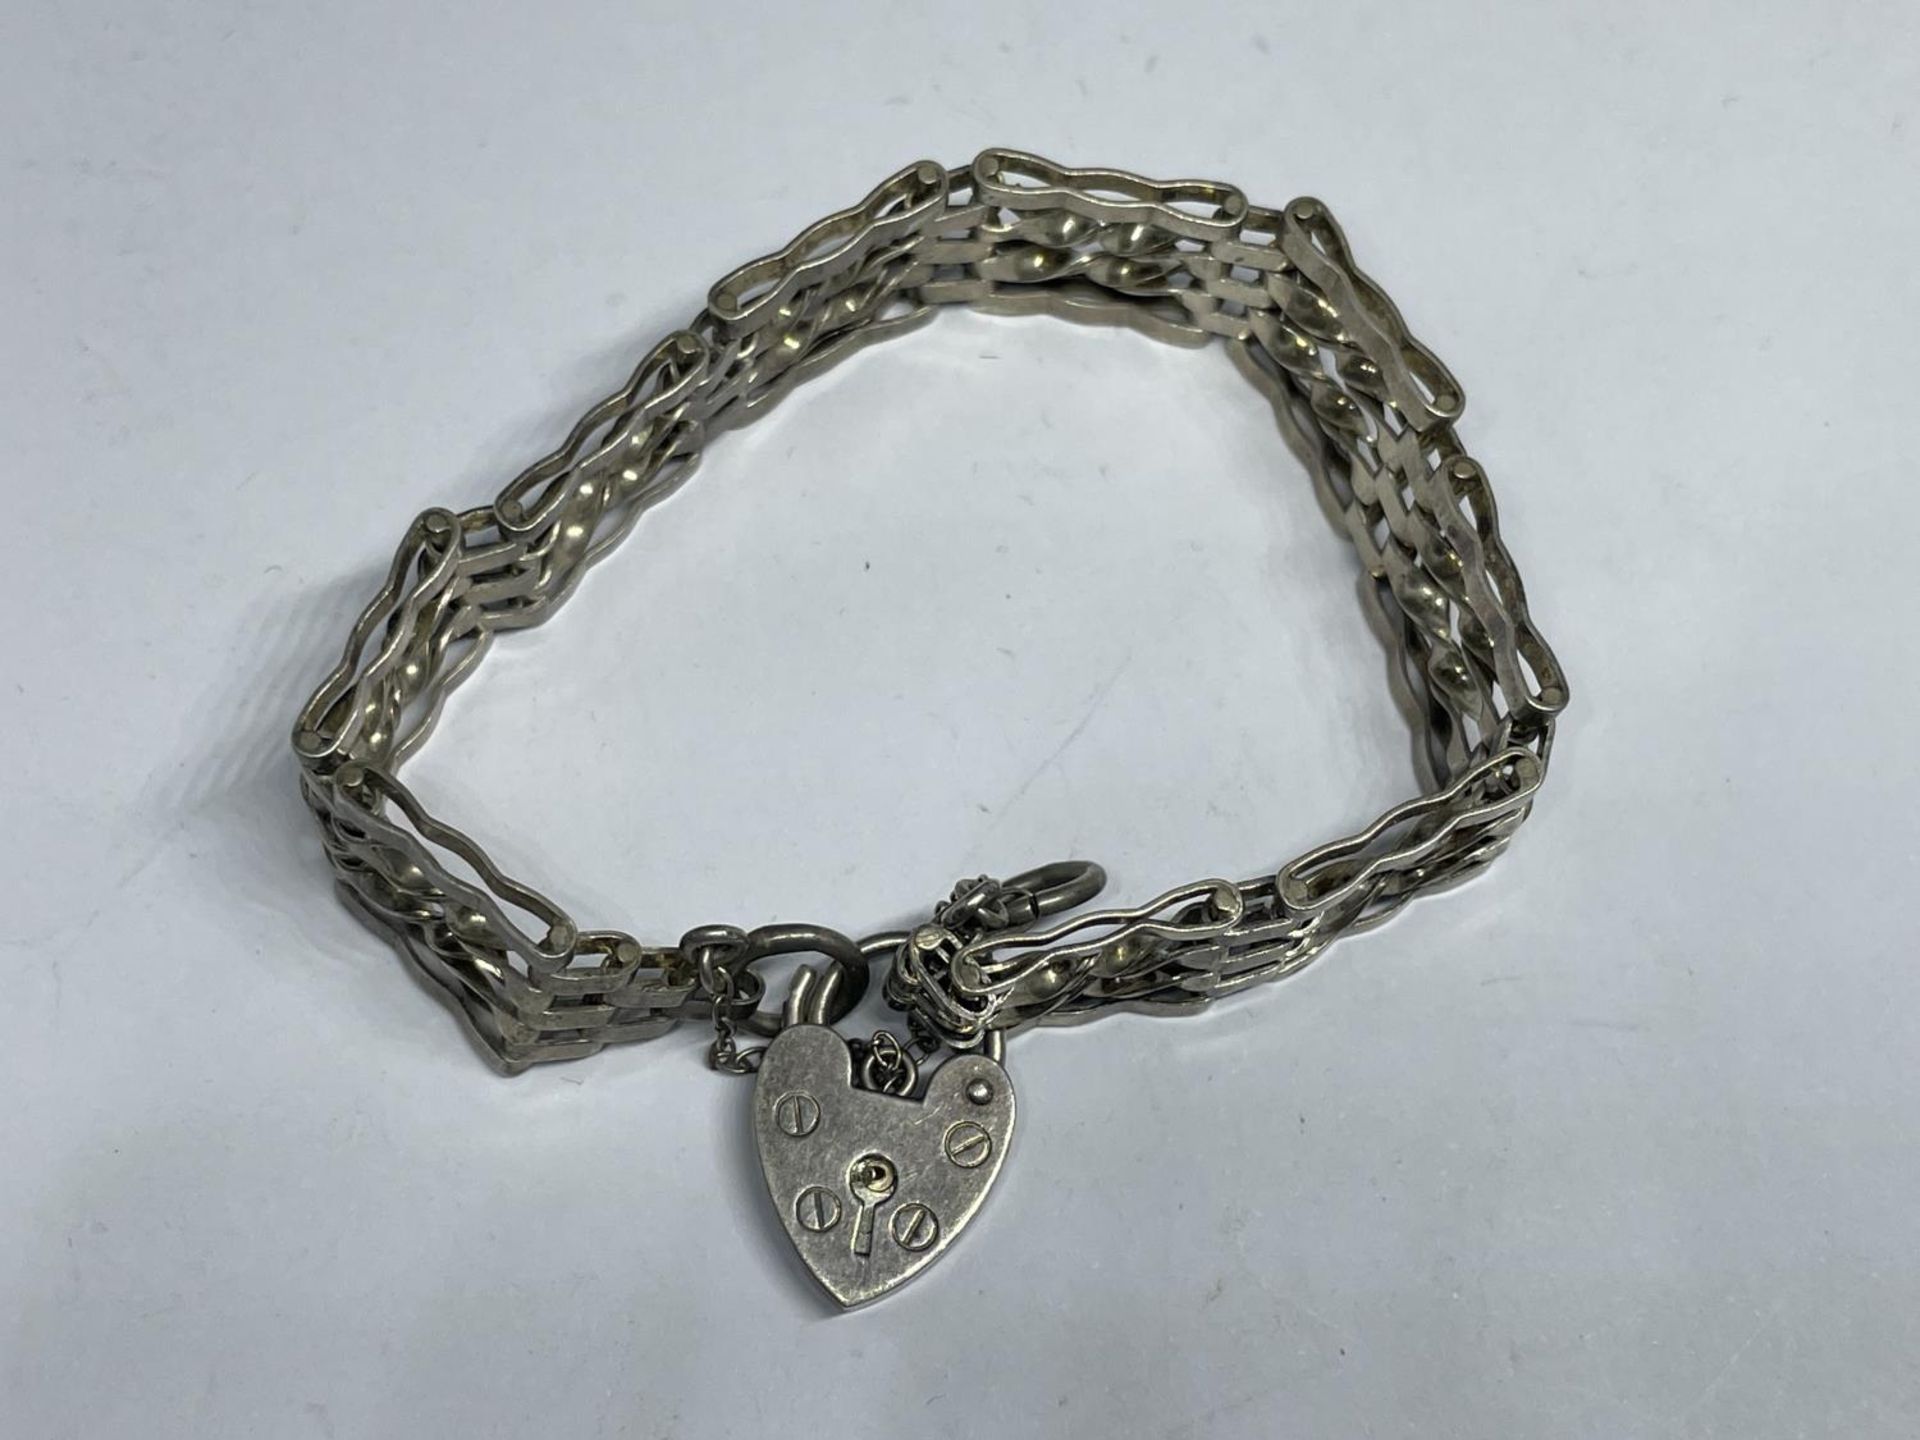 A MARKED SILVER FOUR BAR GATE BRACELET WITH HEART PADLOCK AND SAFETY CHAIN WEIGHT 15.2 GRAMS - Image 2 of 3